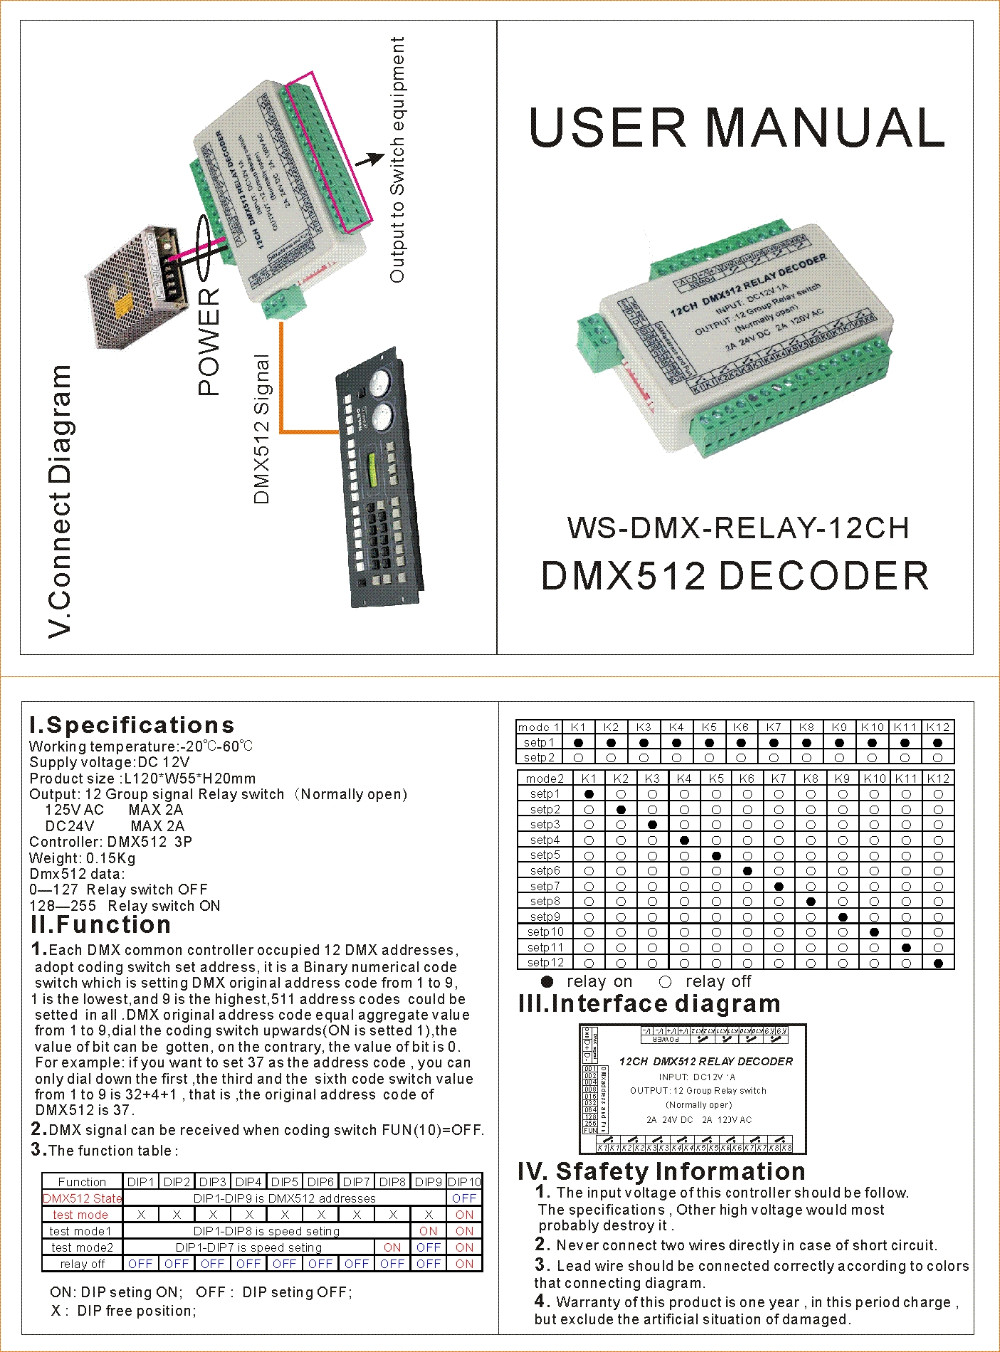 DMX_Controllers_and_Decoders_WS_DMX_RELAY_12CH_2